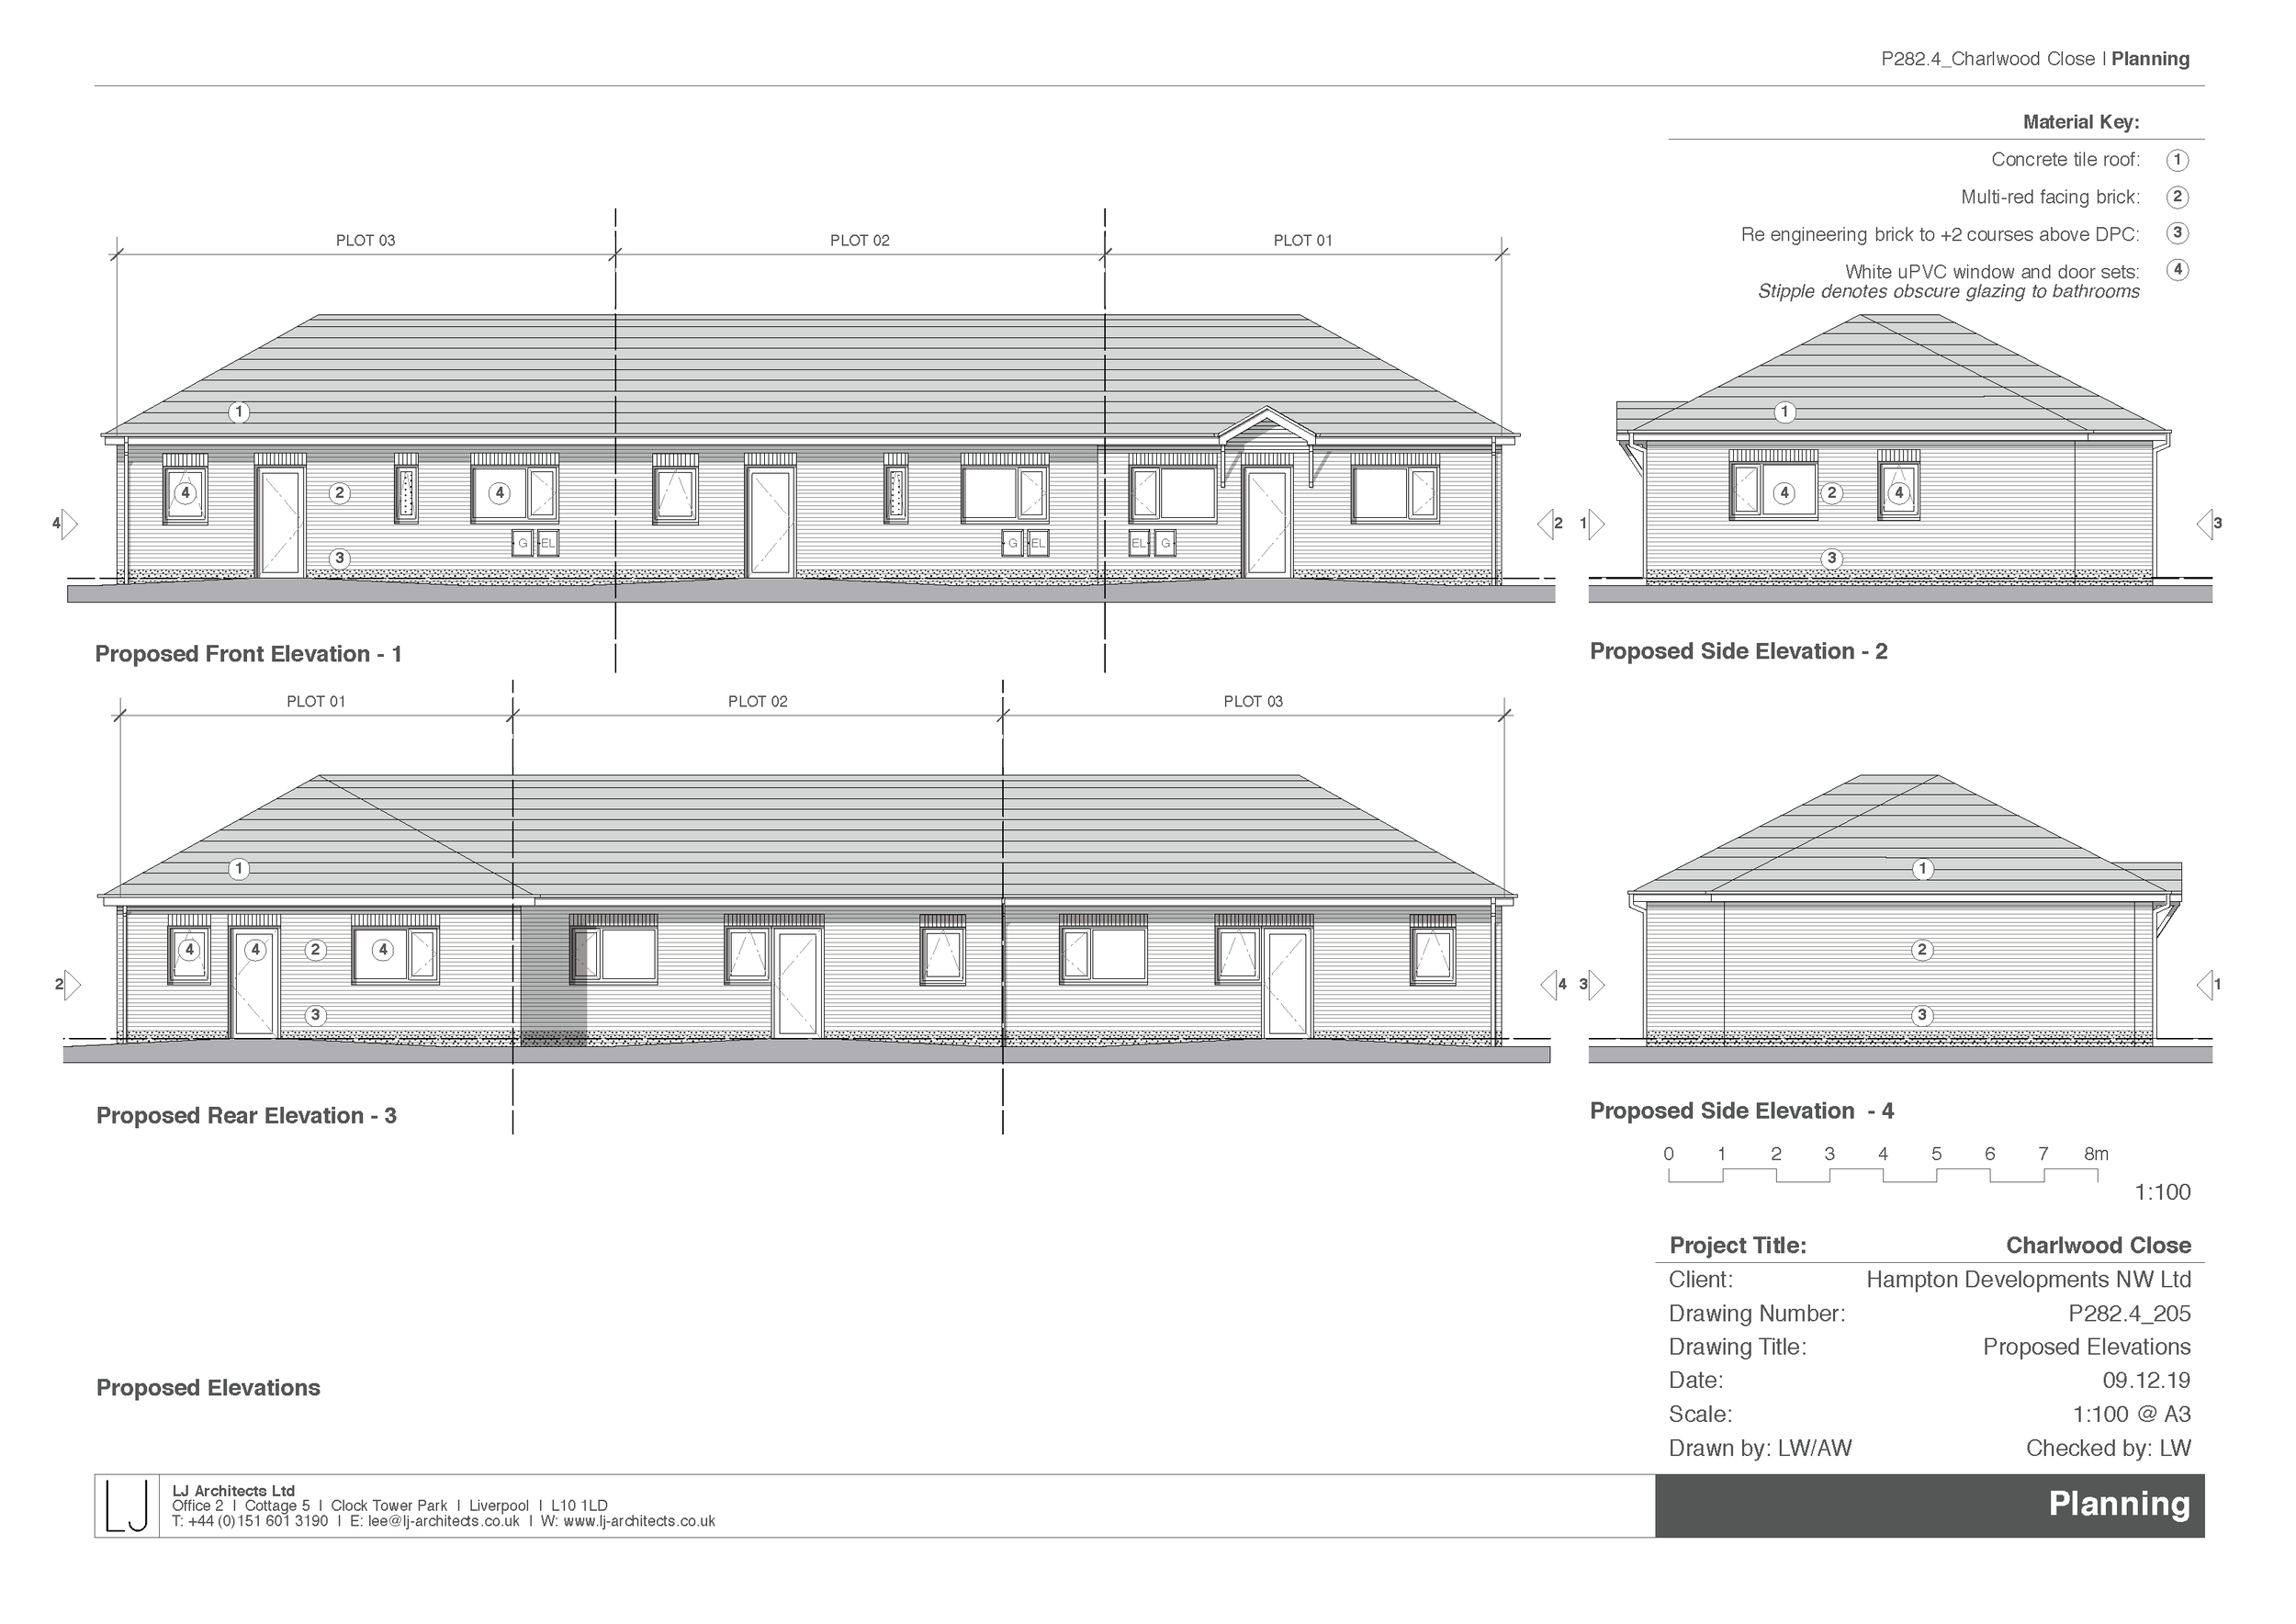 P282.4_205 Proposed Elevations - Charlwood Close.png